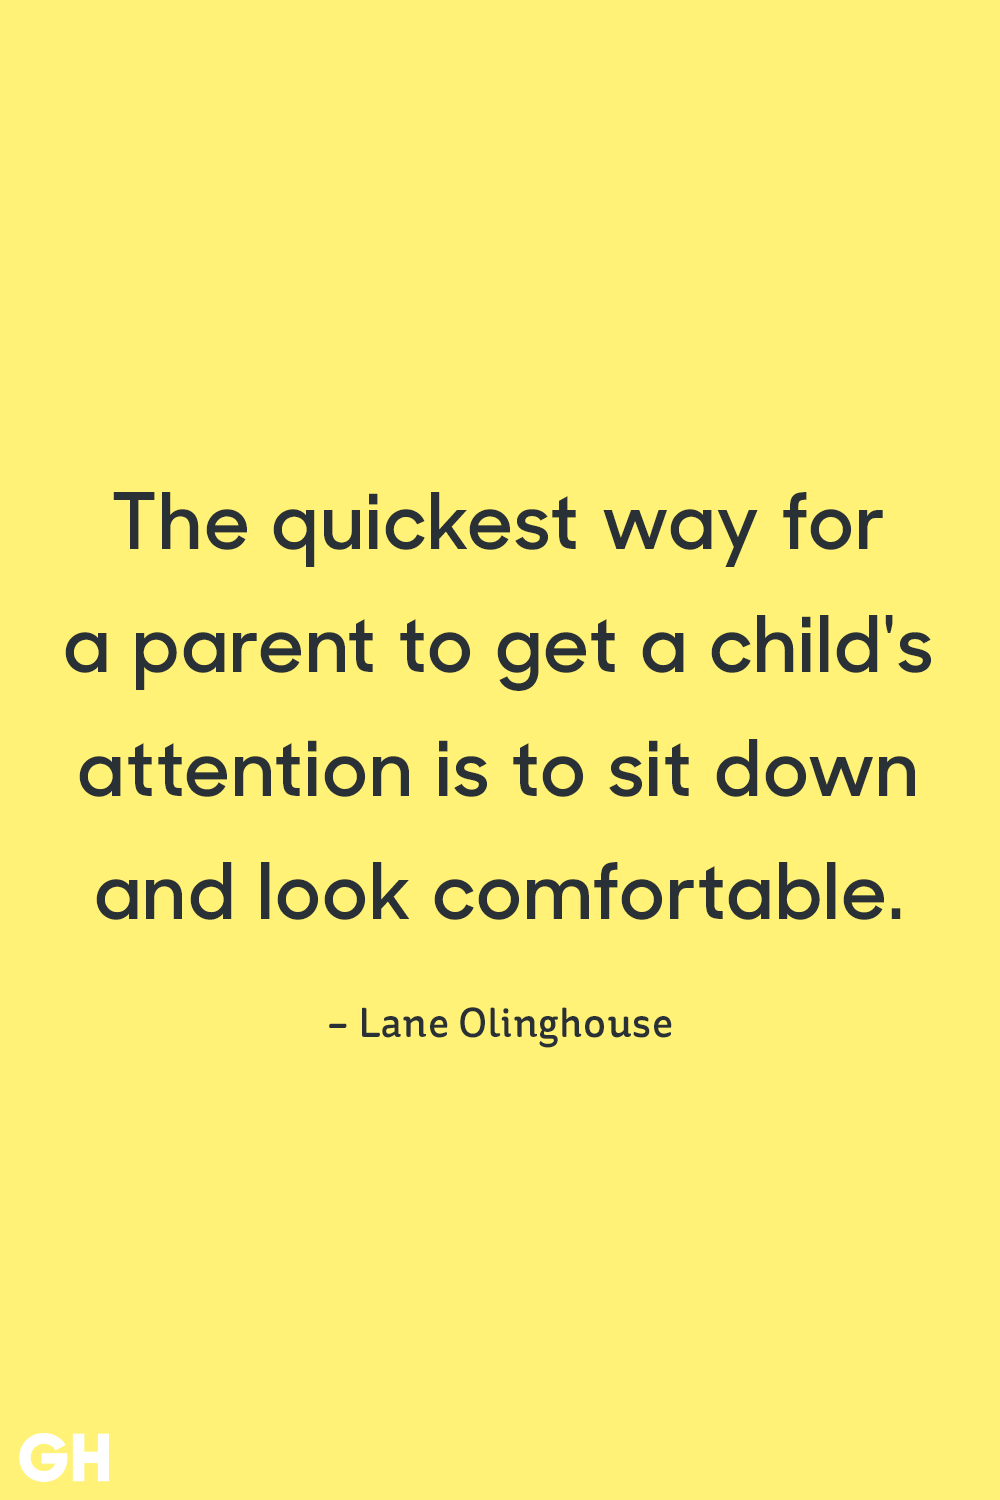 funny-parenting-quotes-getting-kids-attention-1532111376.png